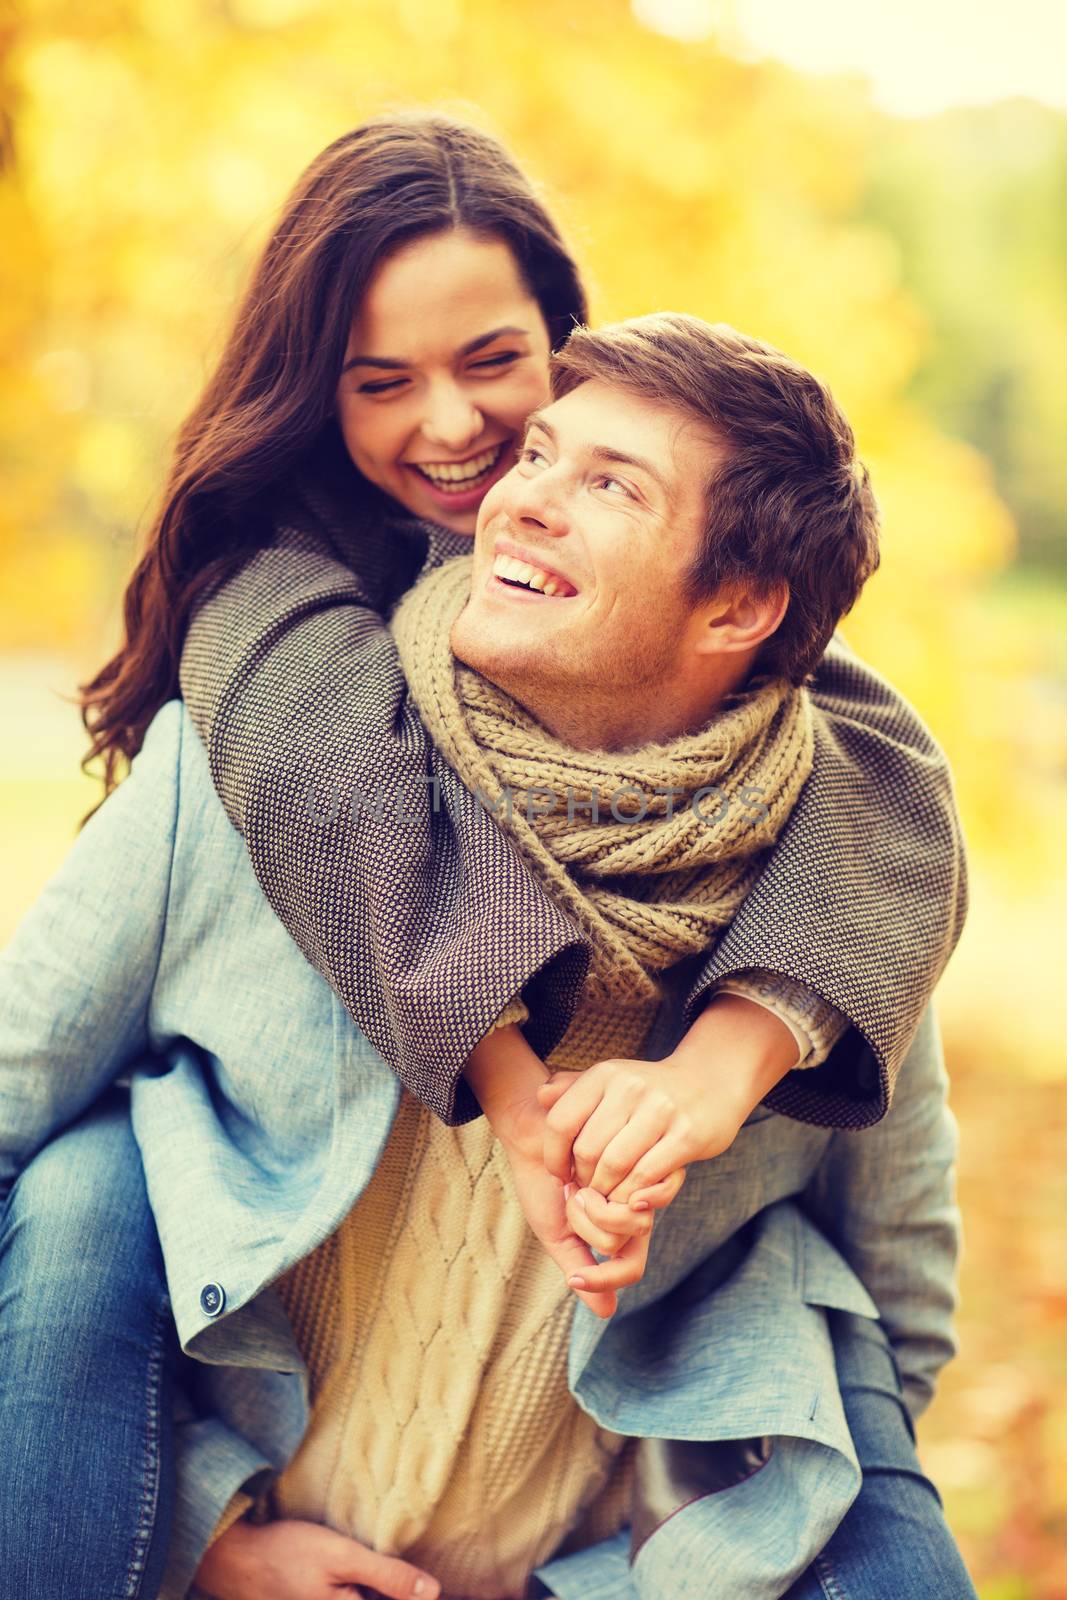 holidays, love, travel, relationship and dating concept - romantic couple playing in the autumn park